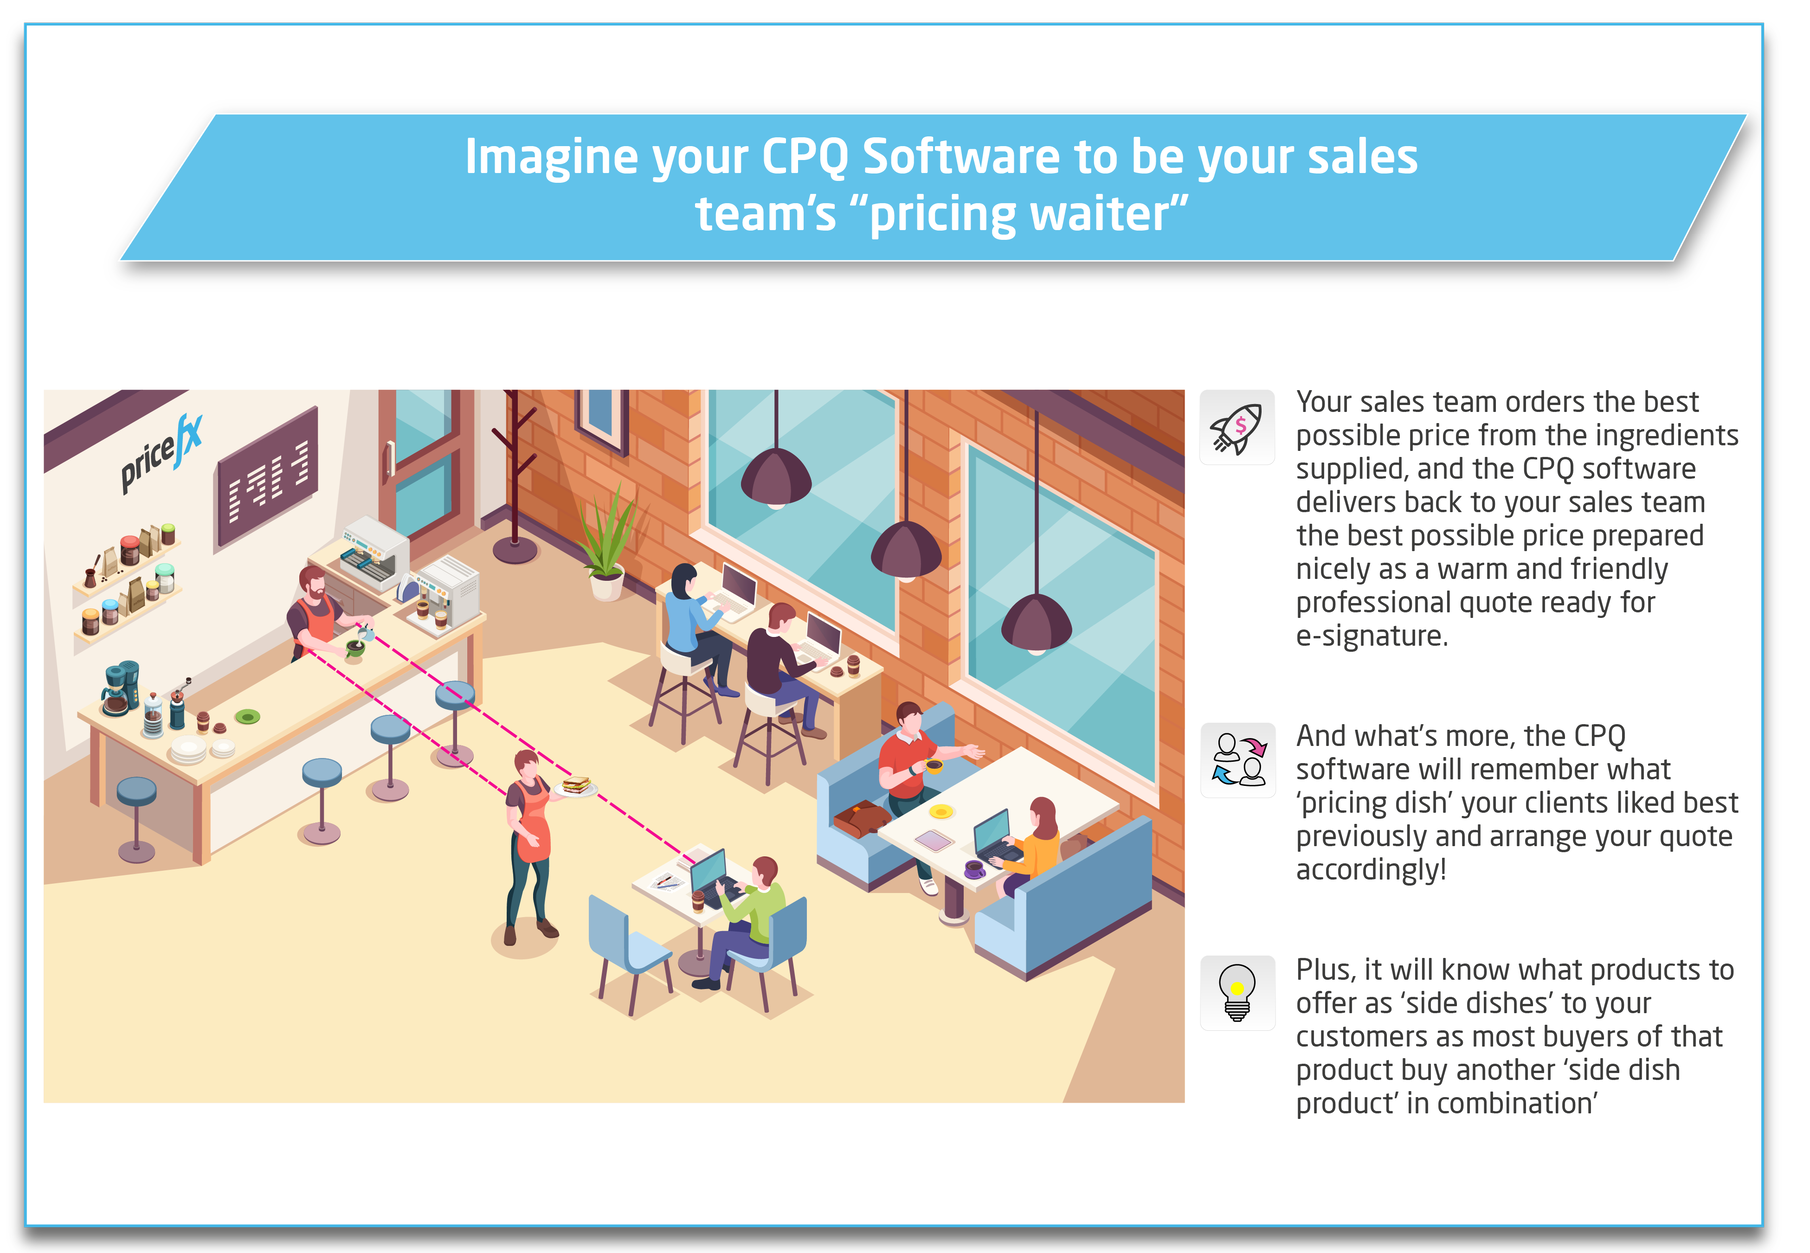 Imagine-CPQ-As-Your-Sales-Team-Pricing-Waiter